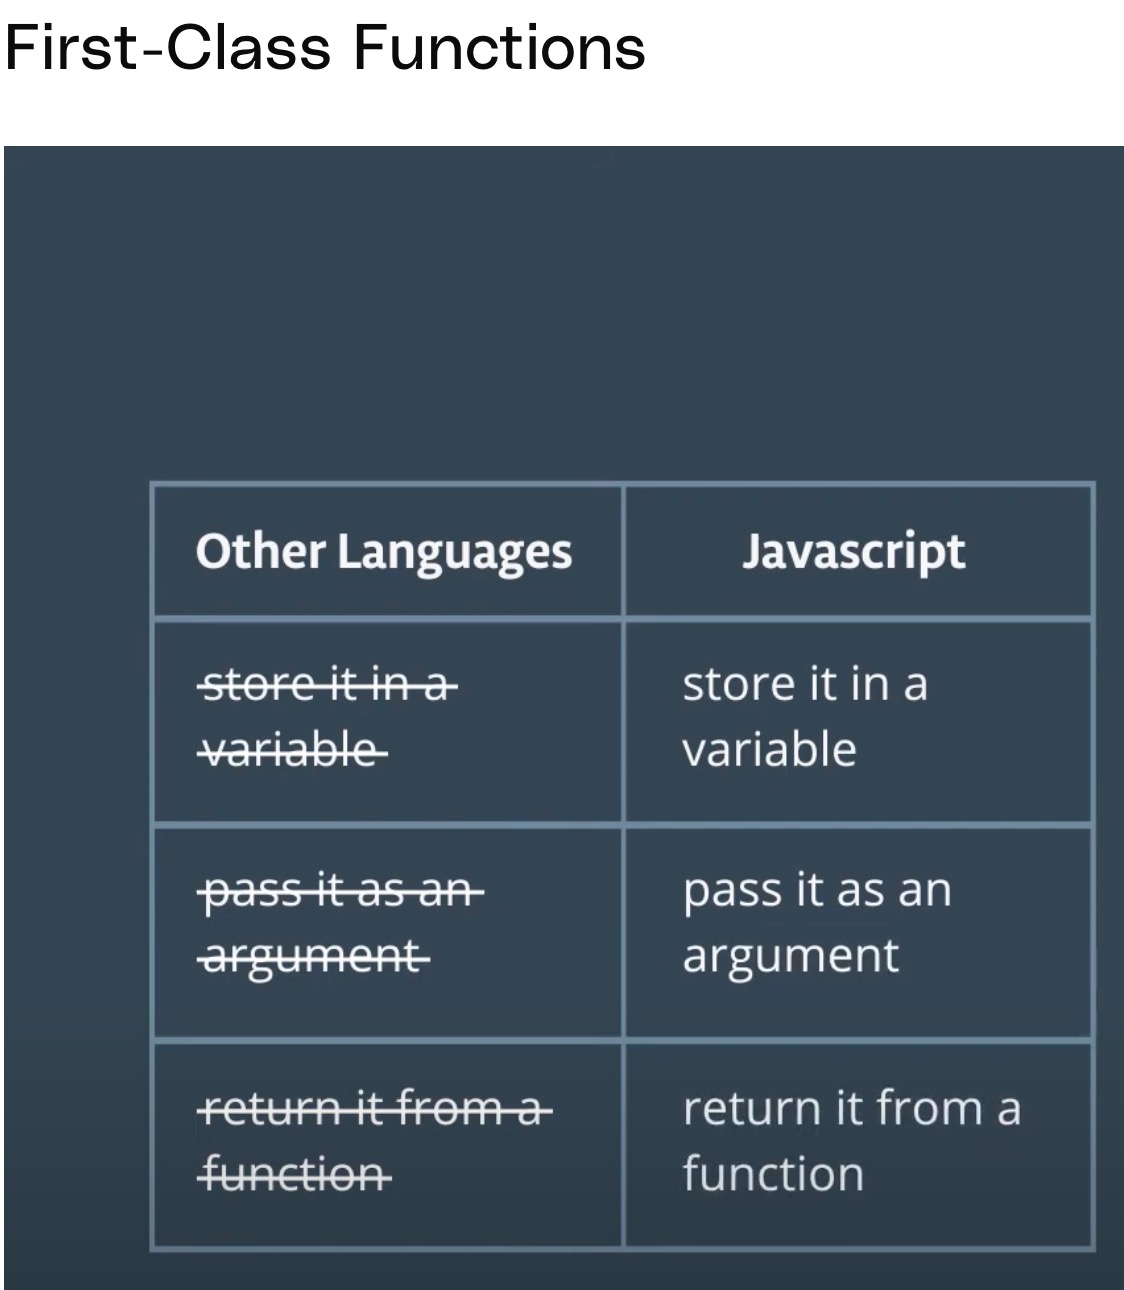 Functions in Javascript vs Other Languages 